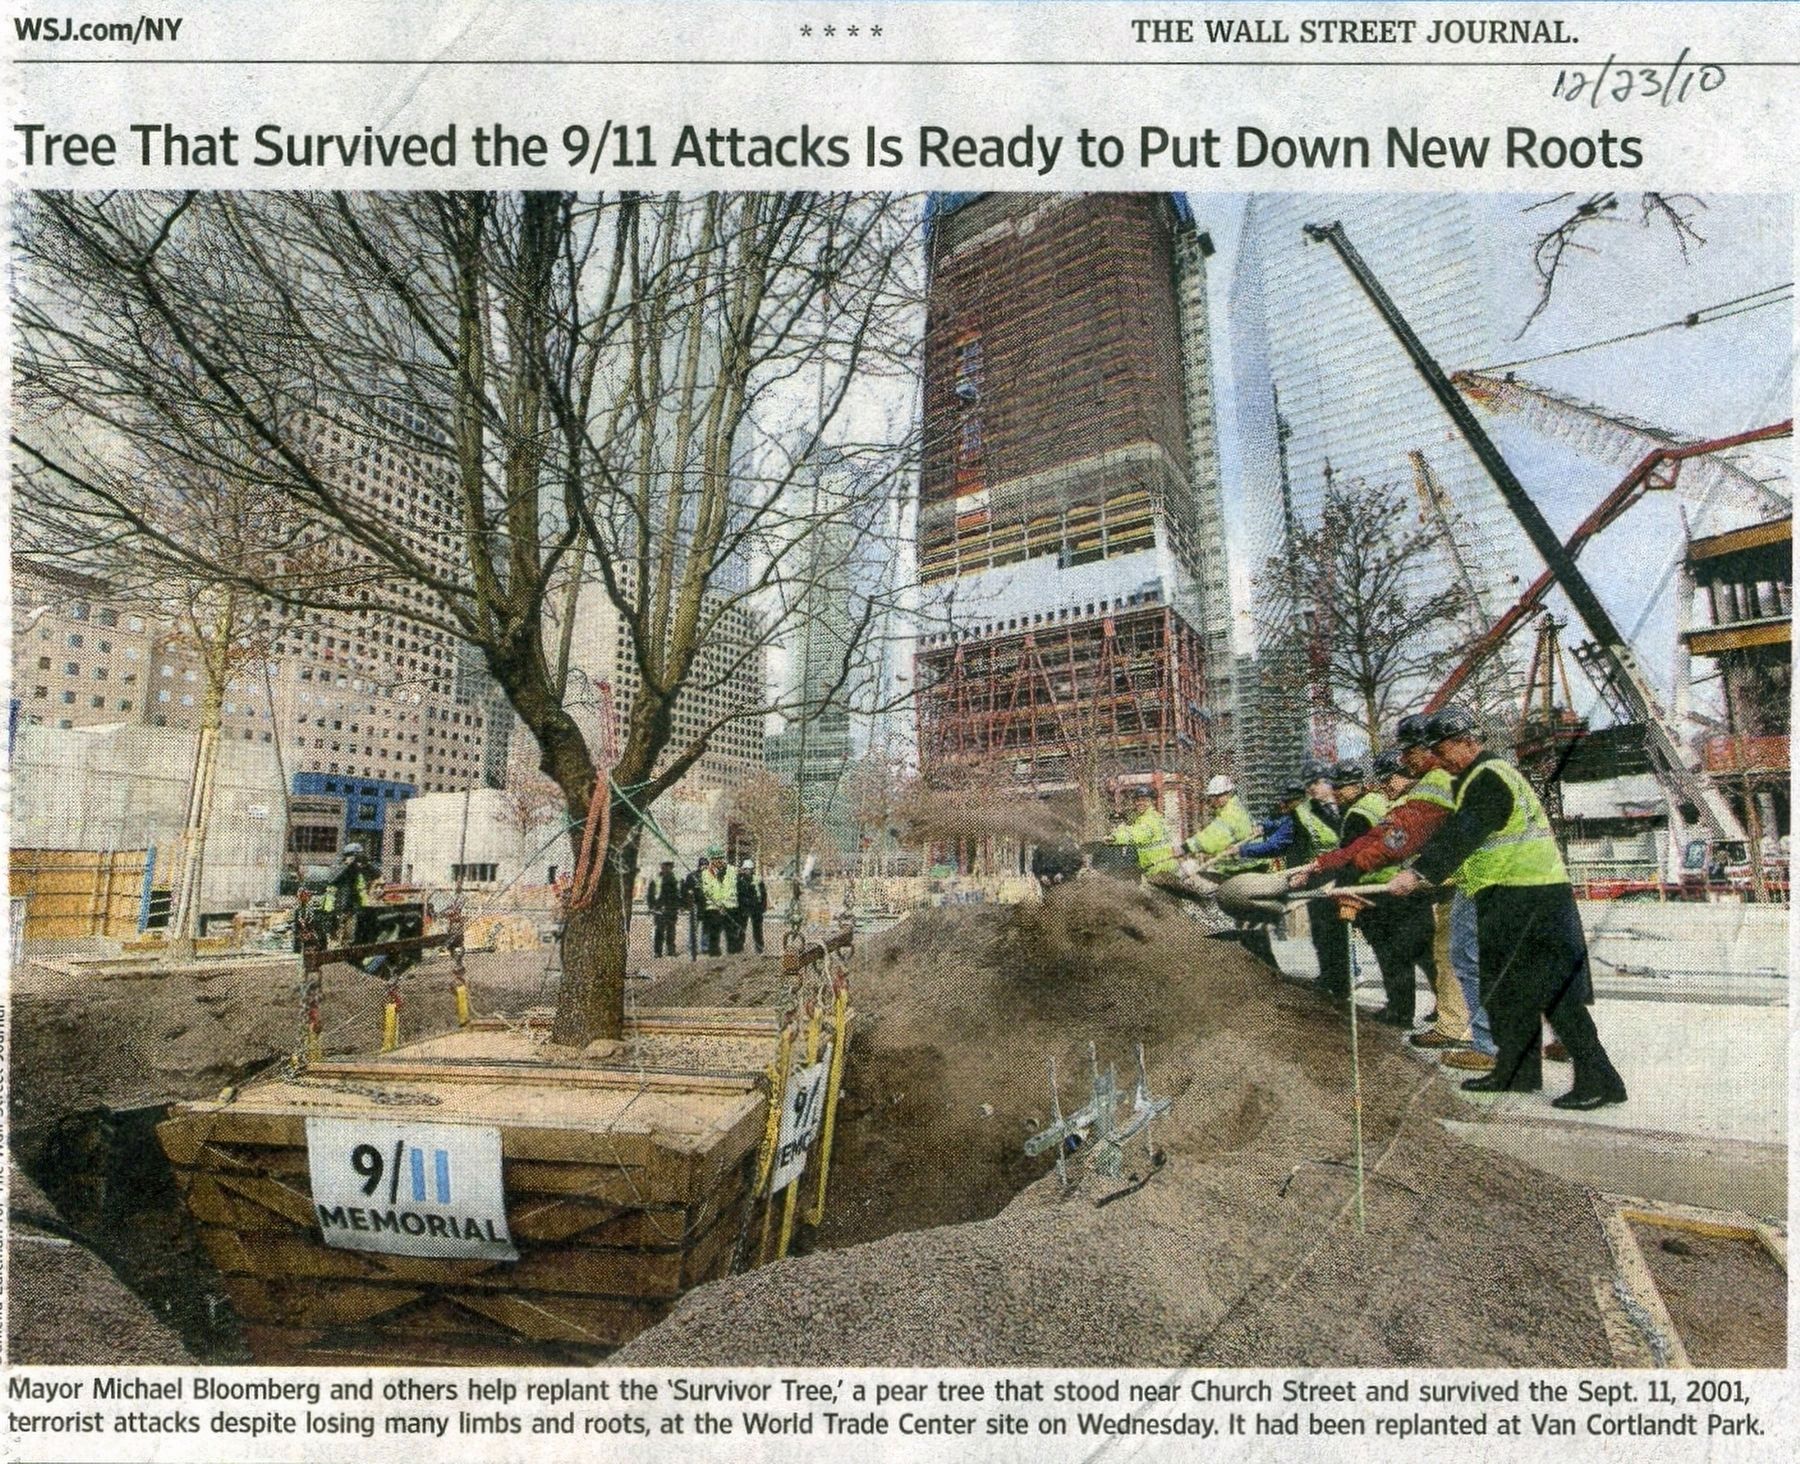 courtesy Wall Street Journal, December 23, 2010 image. Click for full size.